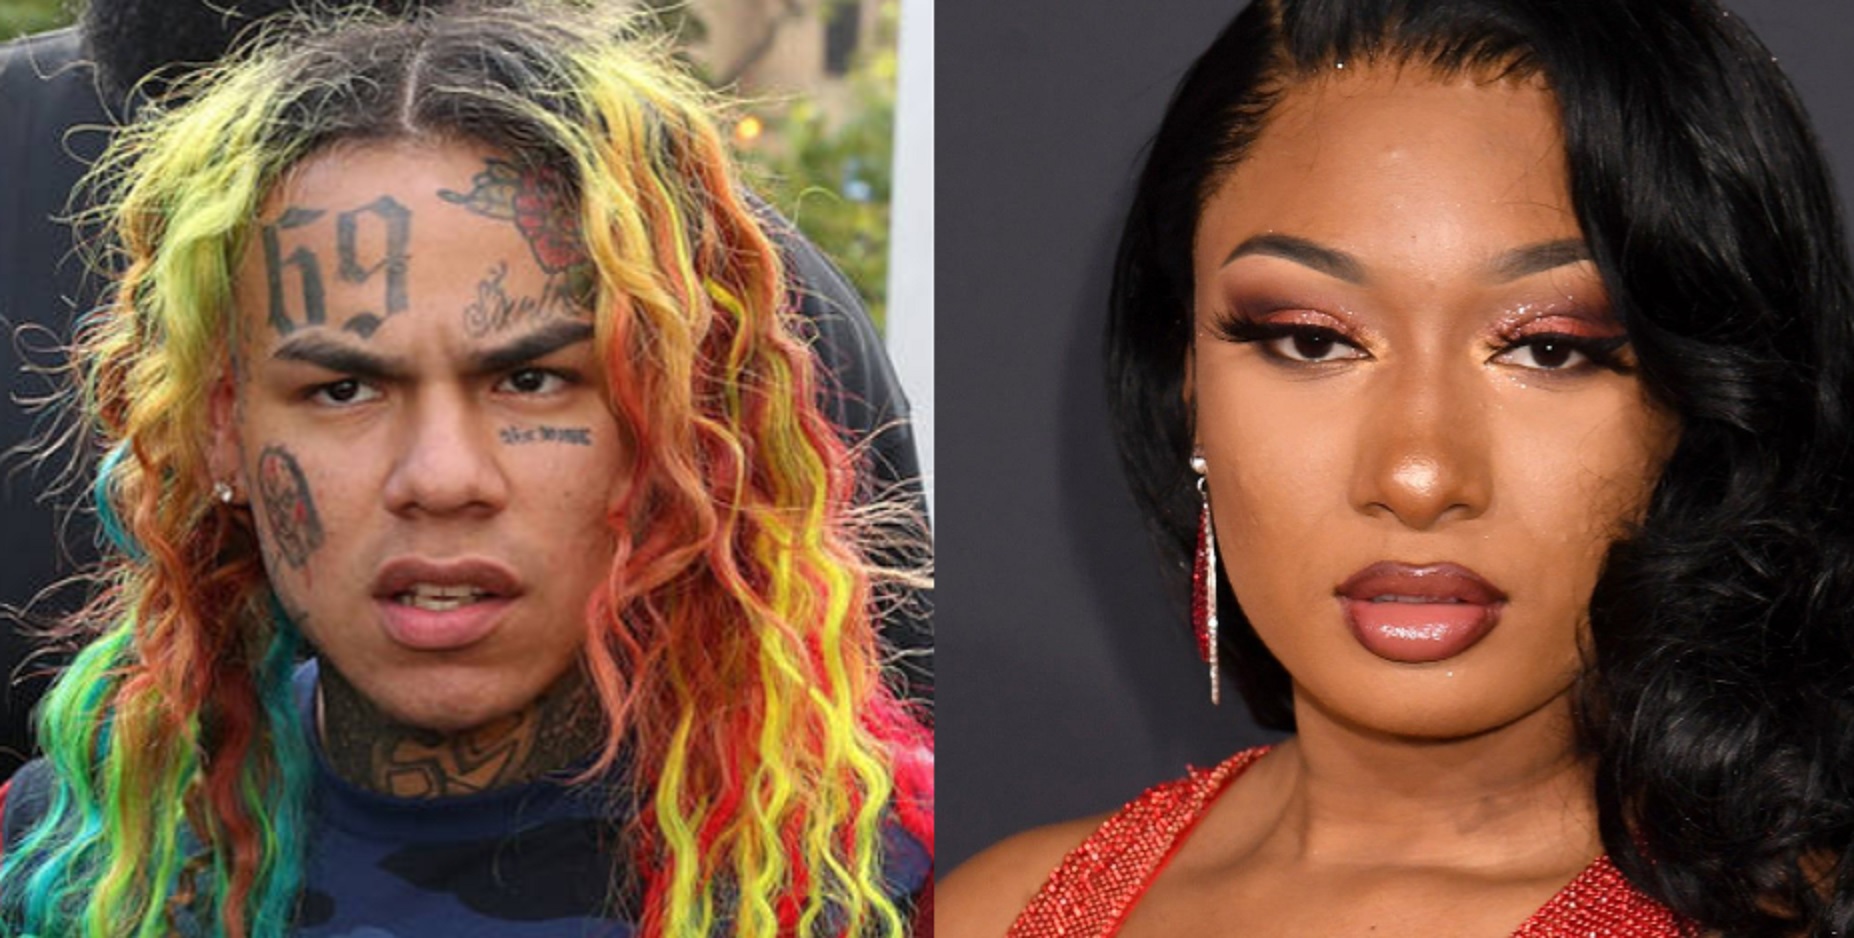 6ix9ine Says Megan Thee Stallion Is His Favorite Rapper Now For ‘Snitching on Tory Lanez’